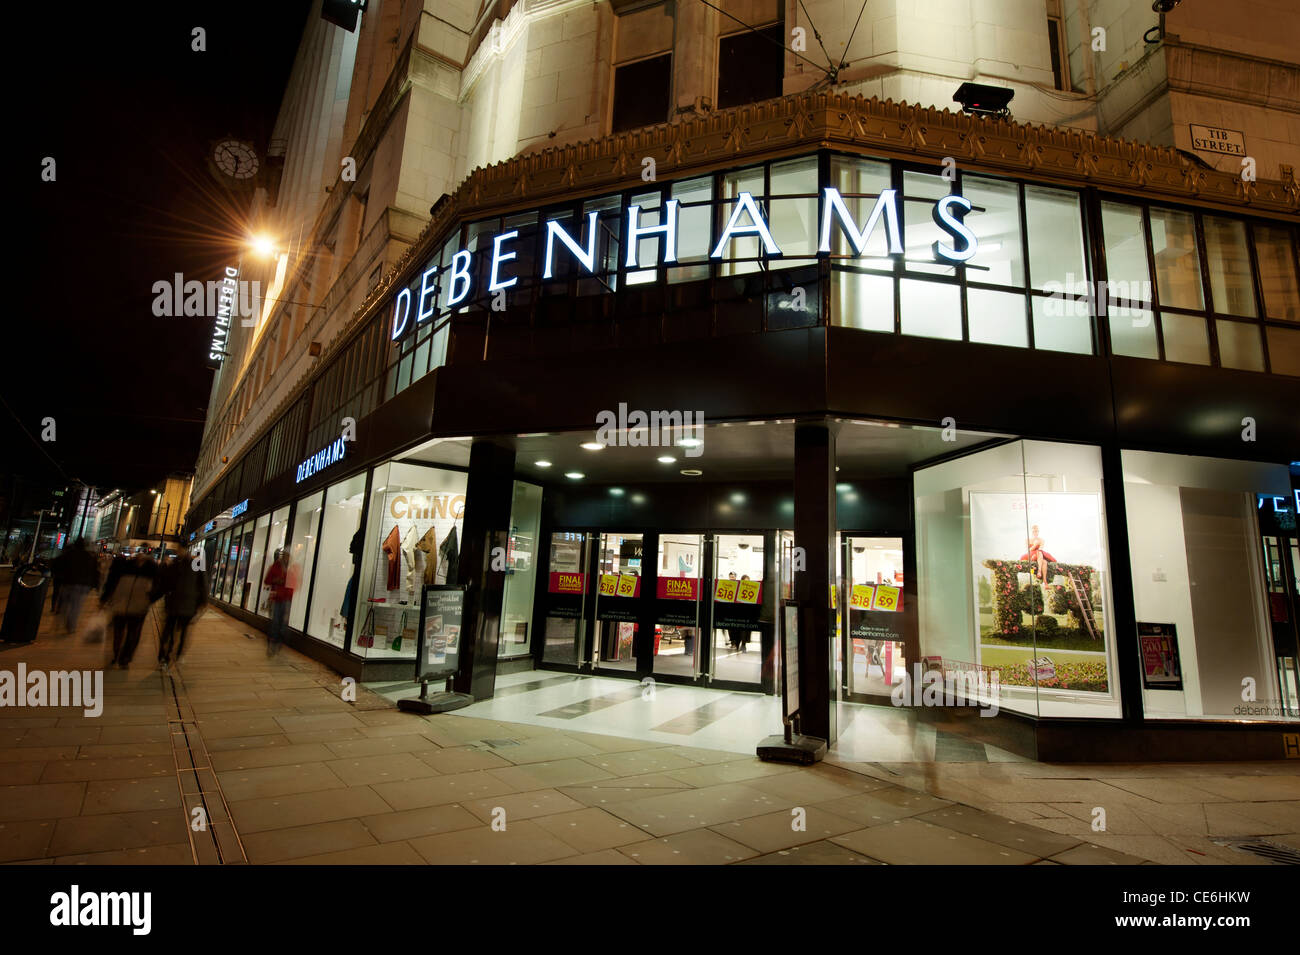 The storefront of the department store Debenhams on Market Street, Manchester, taken at night (Editorial use only). Stock Photo